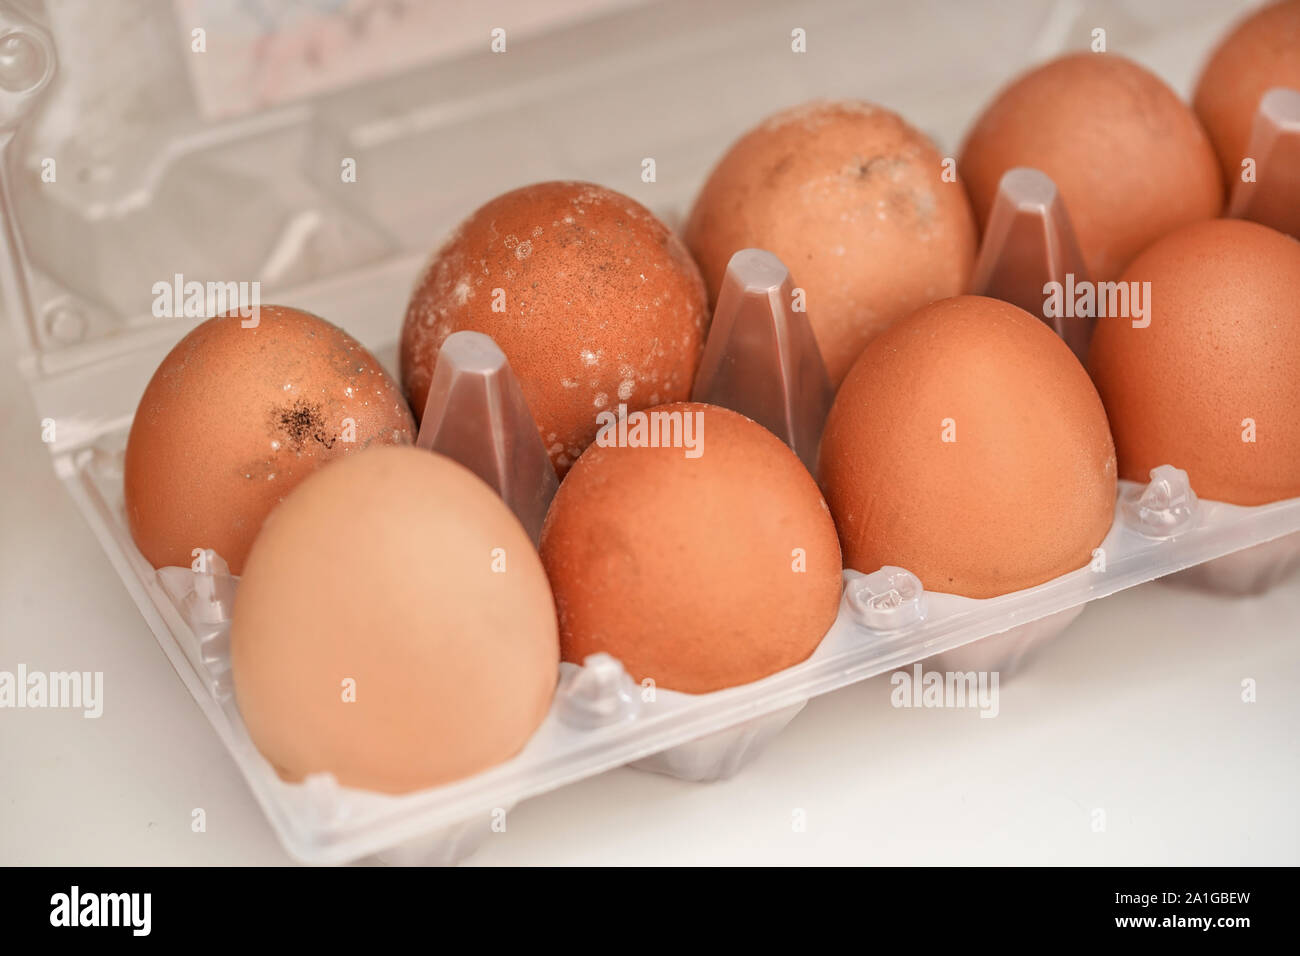 Mildew growing on rotten eggs stored in wet fridge for long time. Mouldy food gone bad Stock Photo